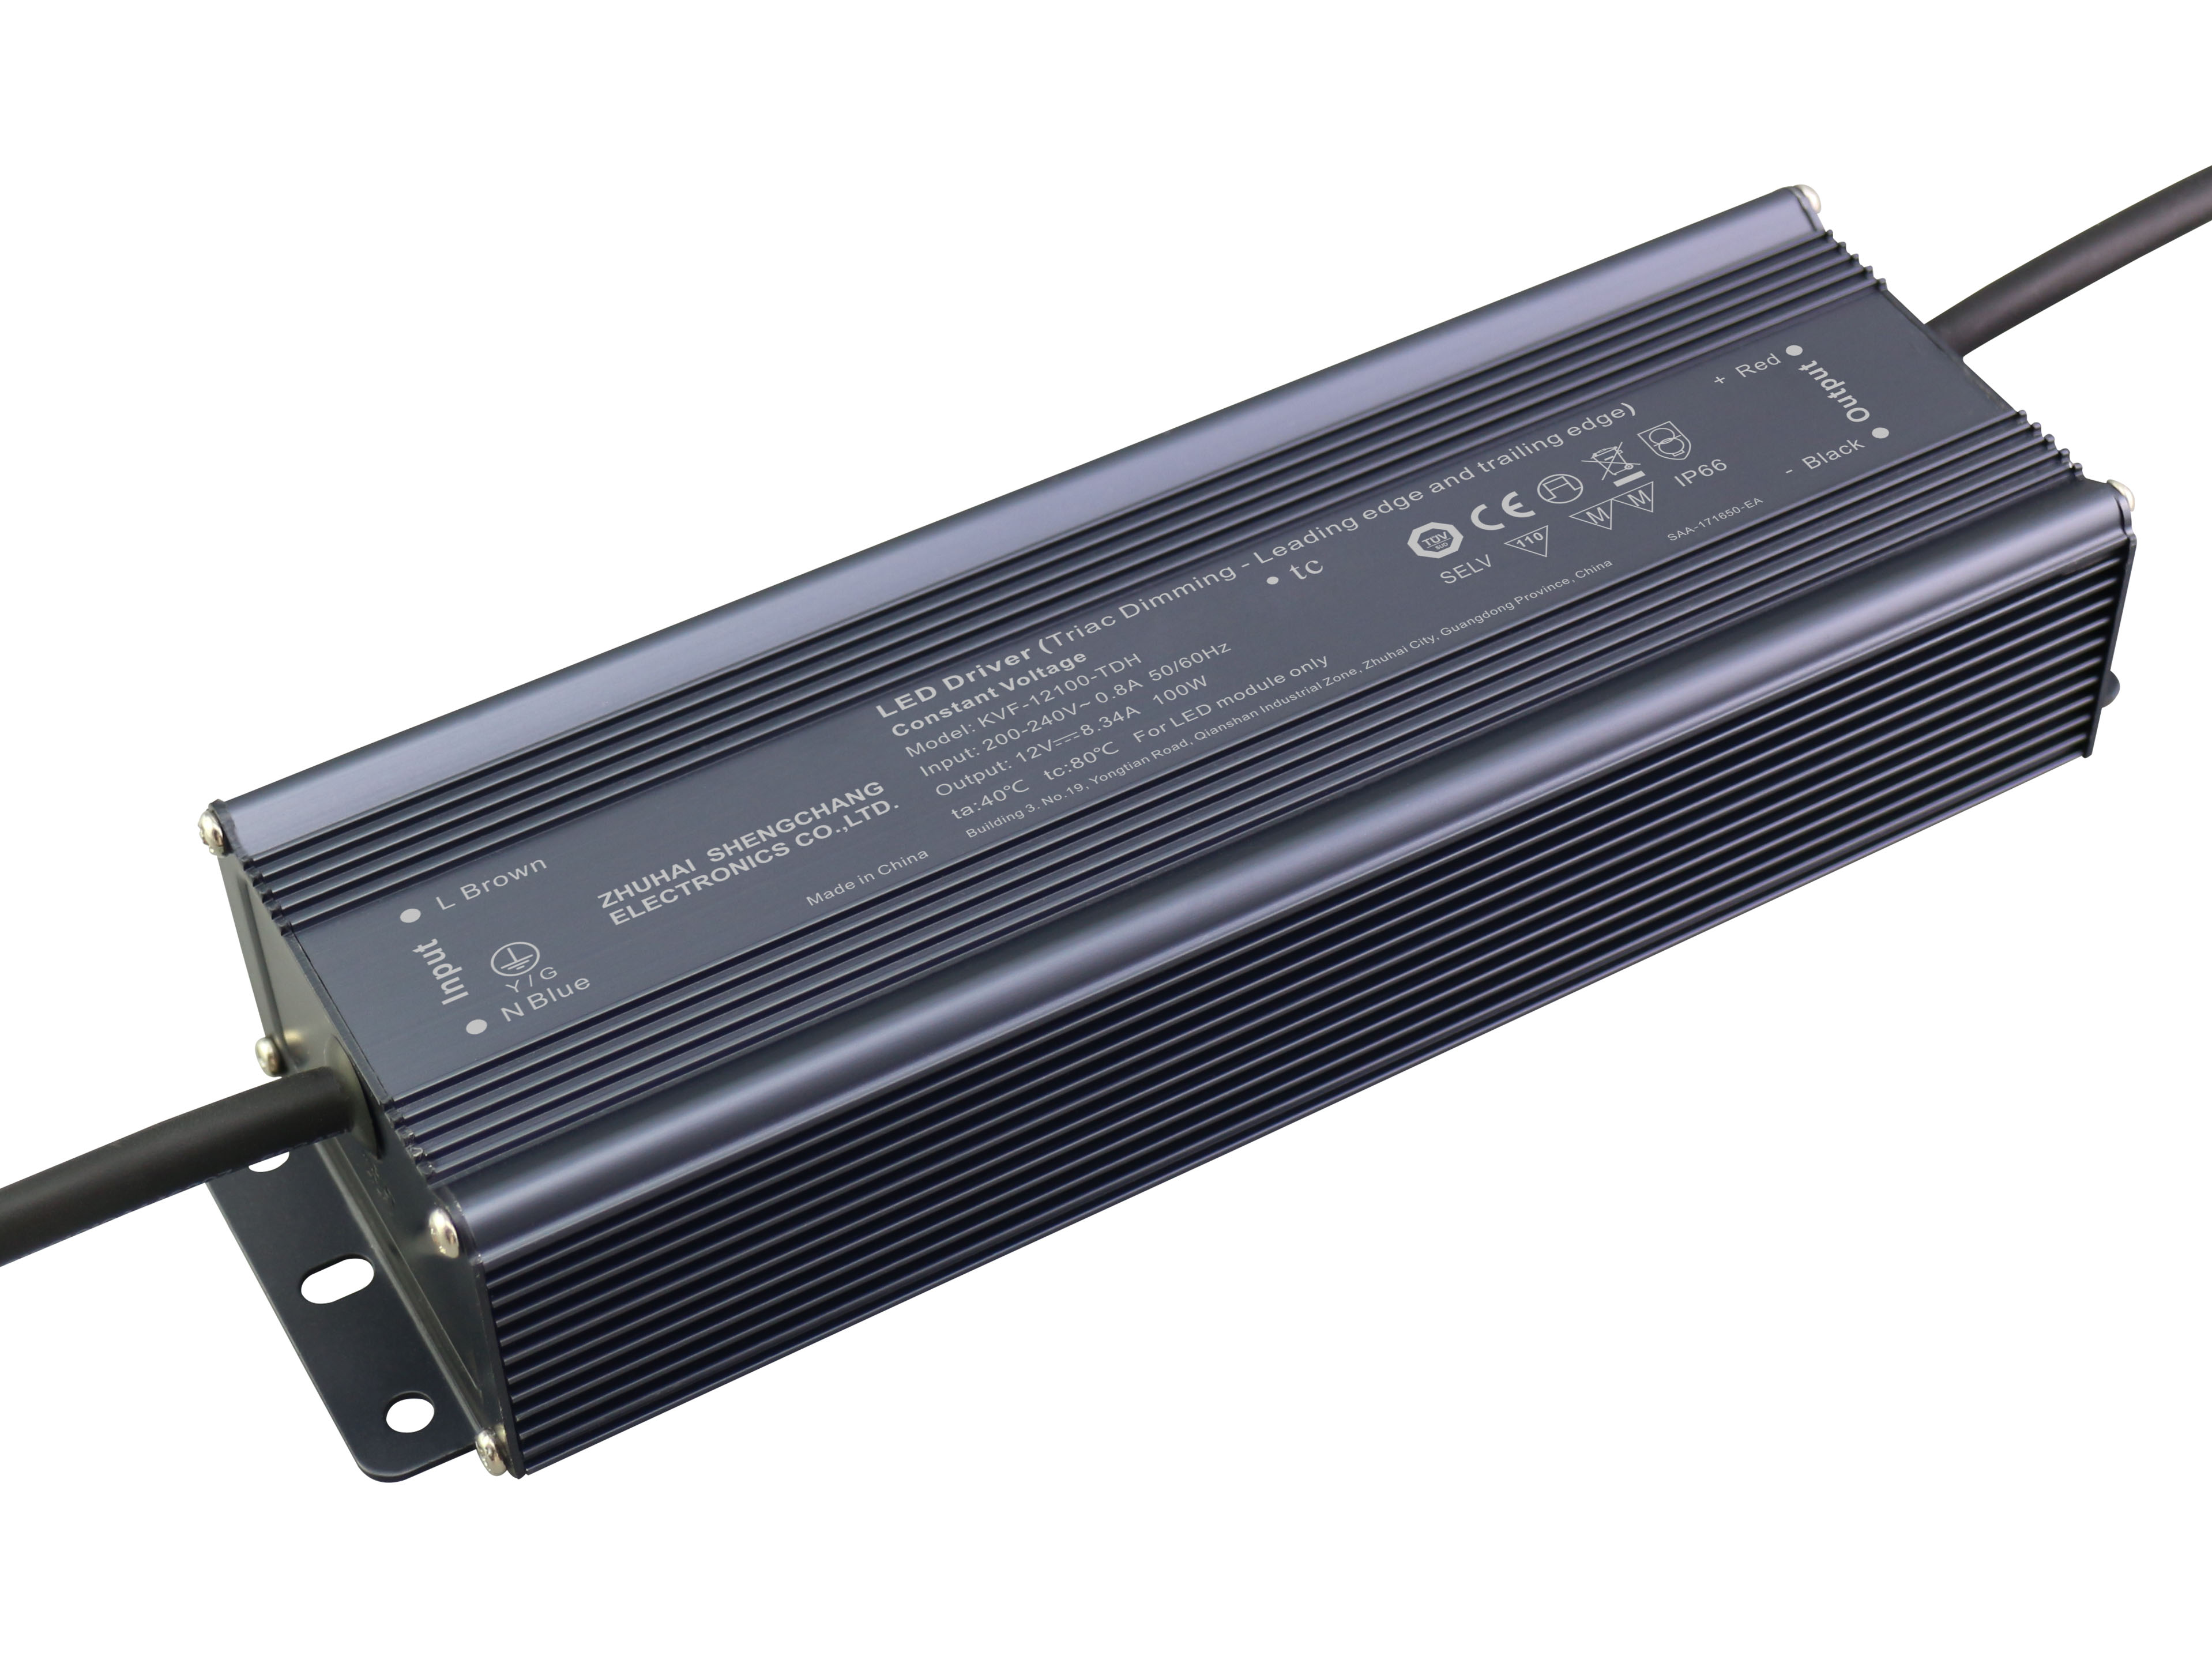 KVF-TDH series 100W Constant Voltage Triac Dimmable LED Driver